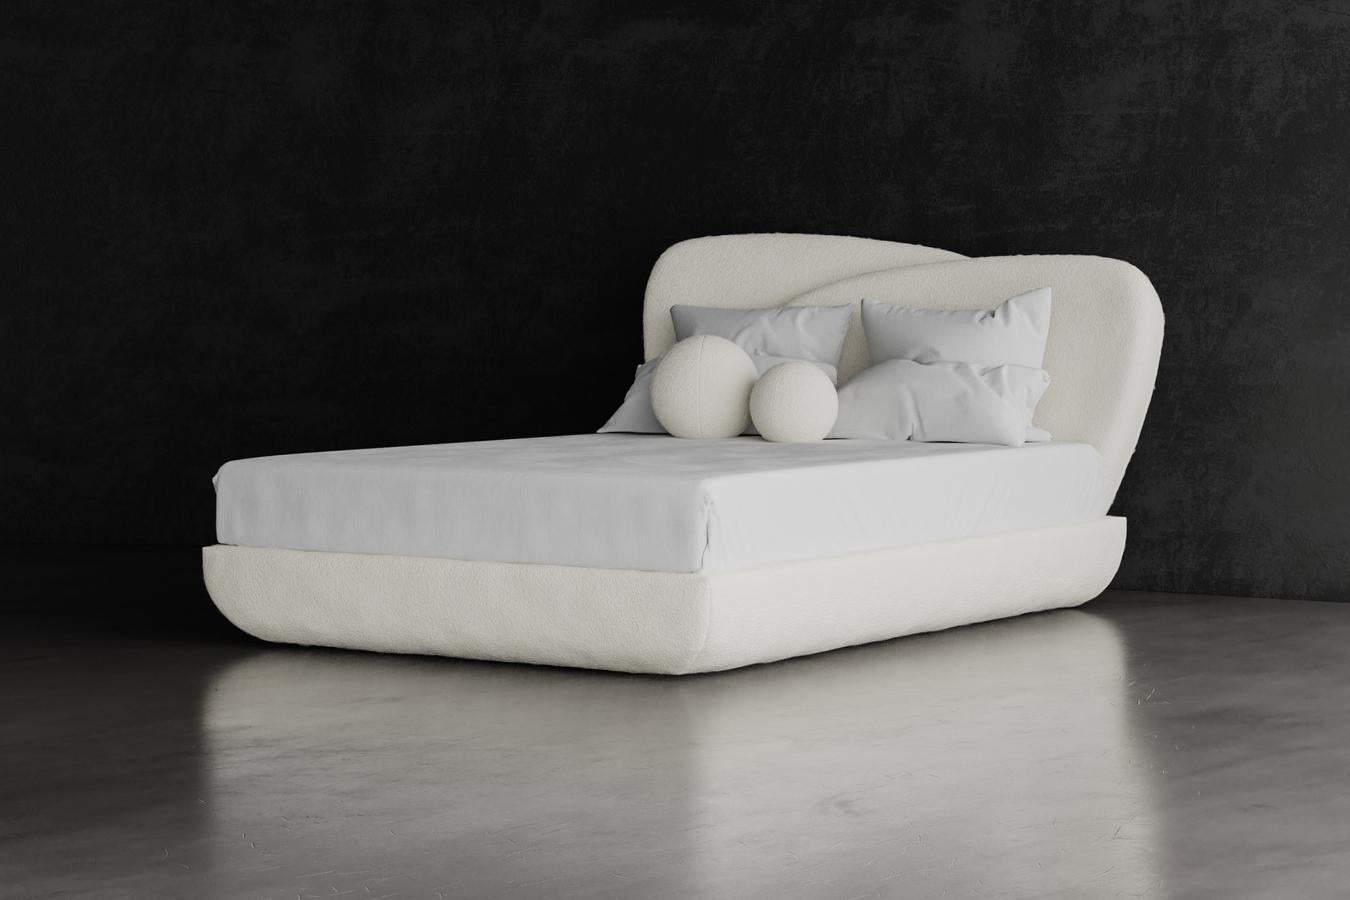 CURVE BED - Modern Layered Asymmetrical Bed in COM

The Curve Bed features asymmetrical design elements that are sophisticated and simple. The unbalanced tension works beautifully together to make a minimal and elegant design statement. COM is